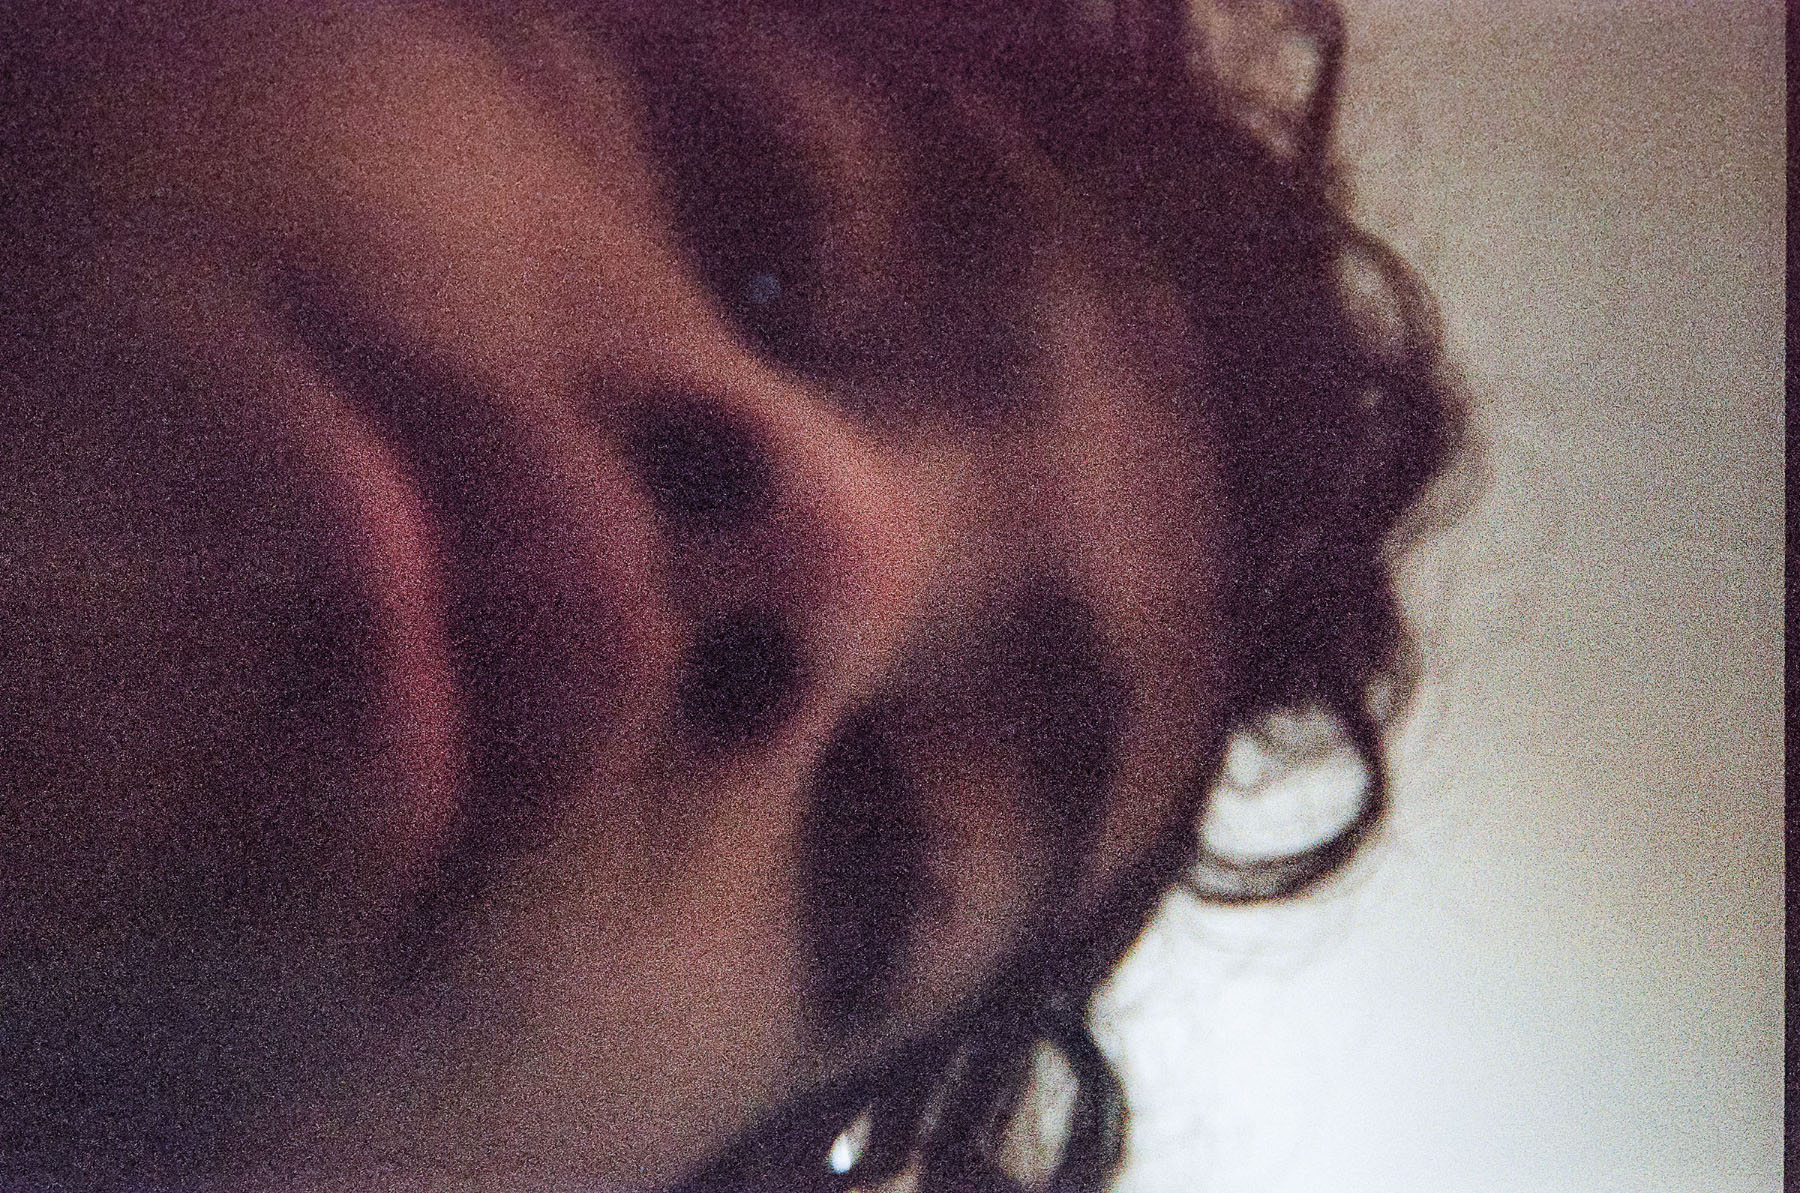 A young man's face fully fills the frame of a selfie image taken from below